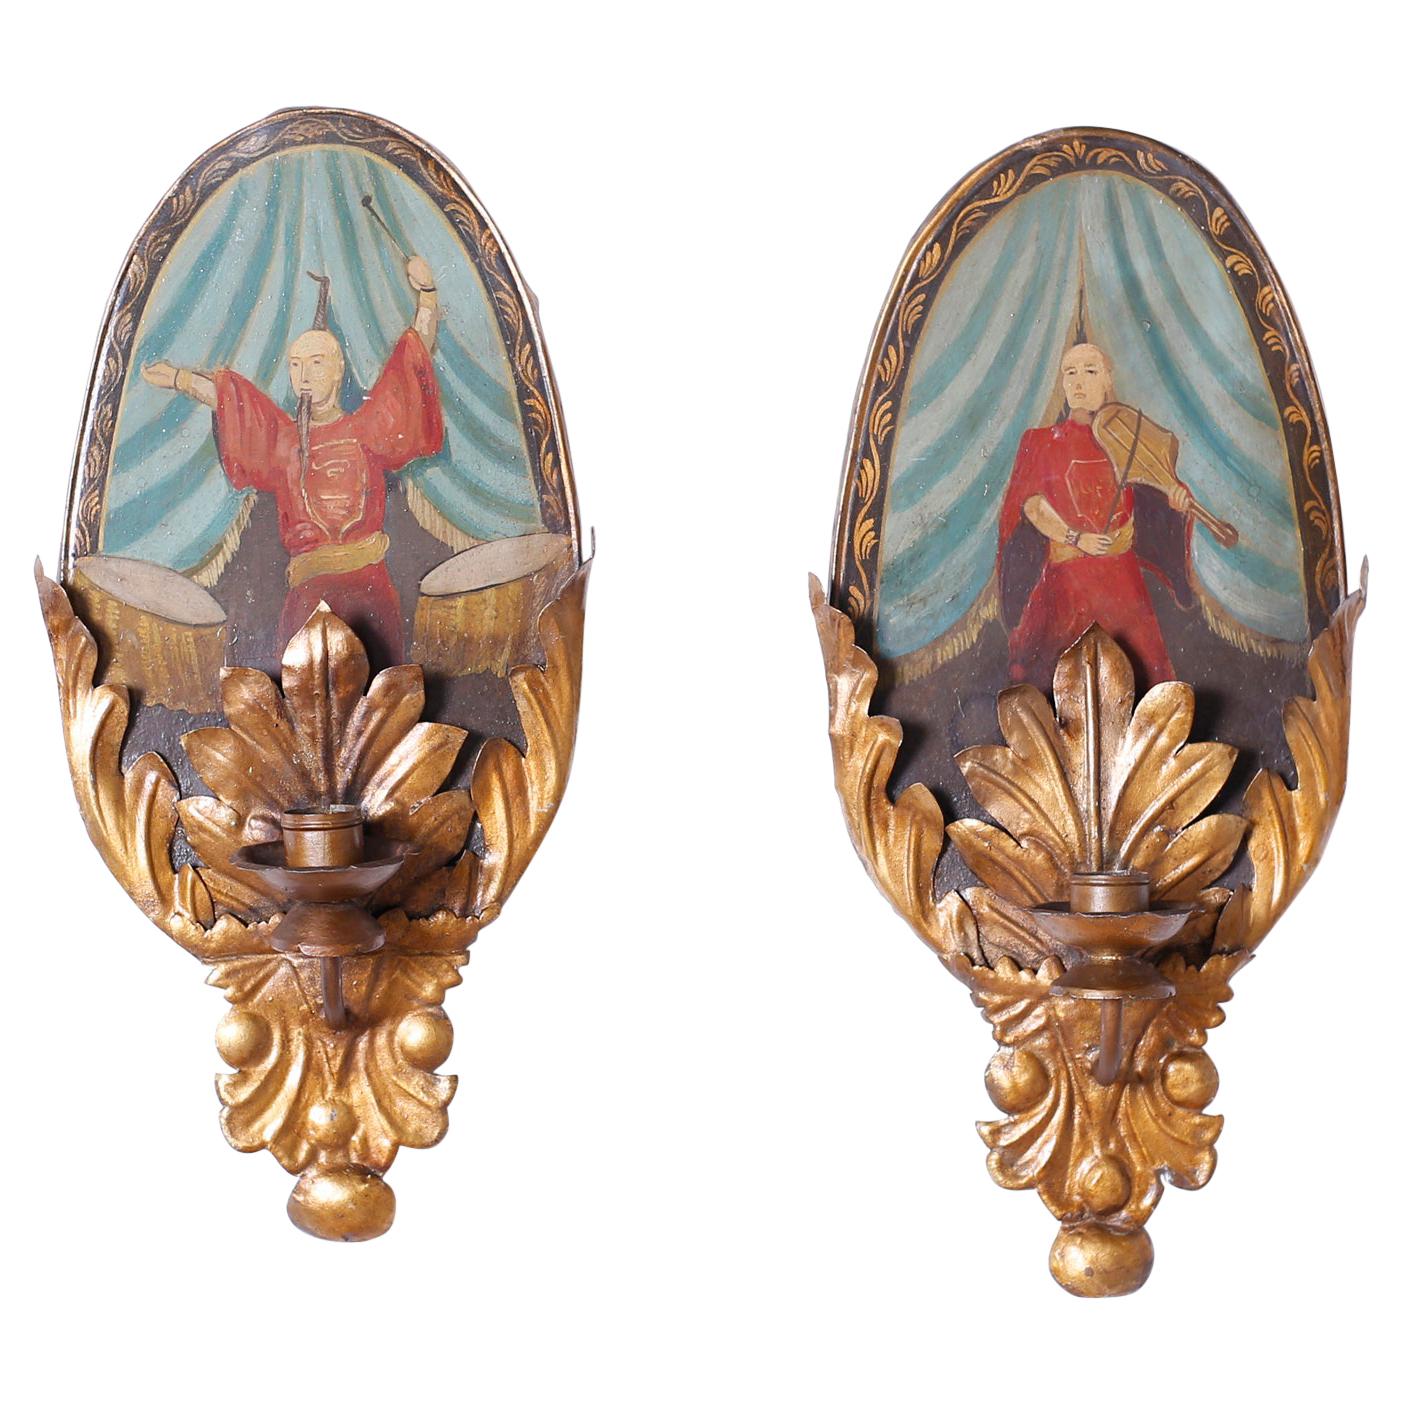 Pair of Tole and Gilt Metal Italian Style Wall Sconces